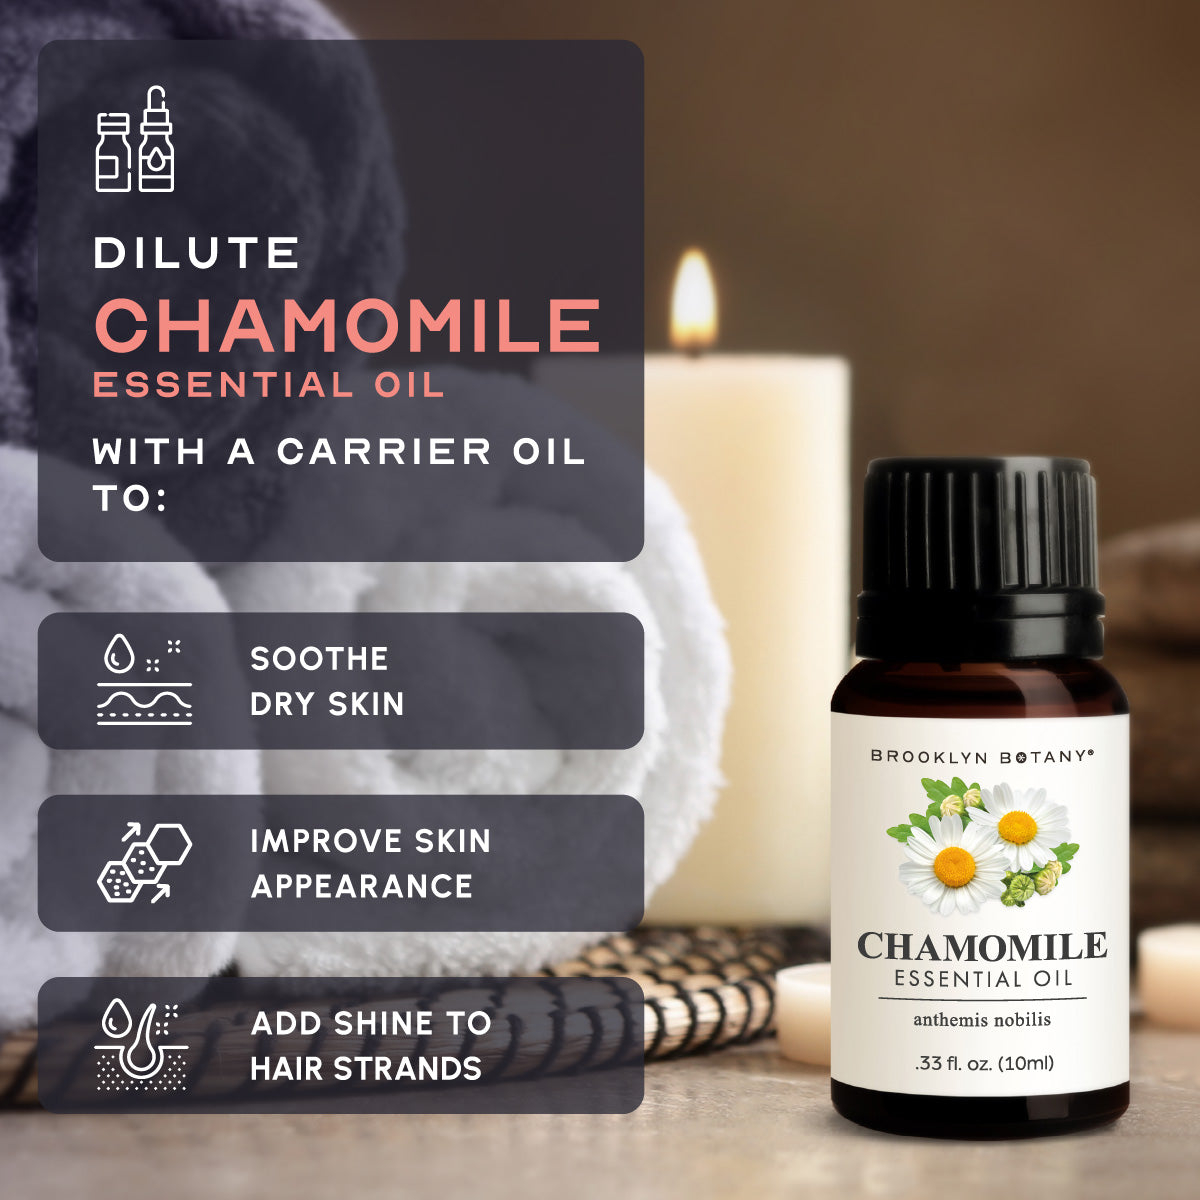 Blue Chamomile Essential Oil Profile– Miracle Botanicals Essential Oils